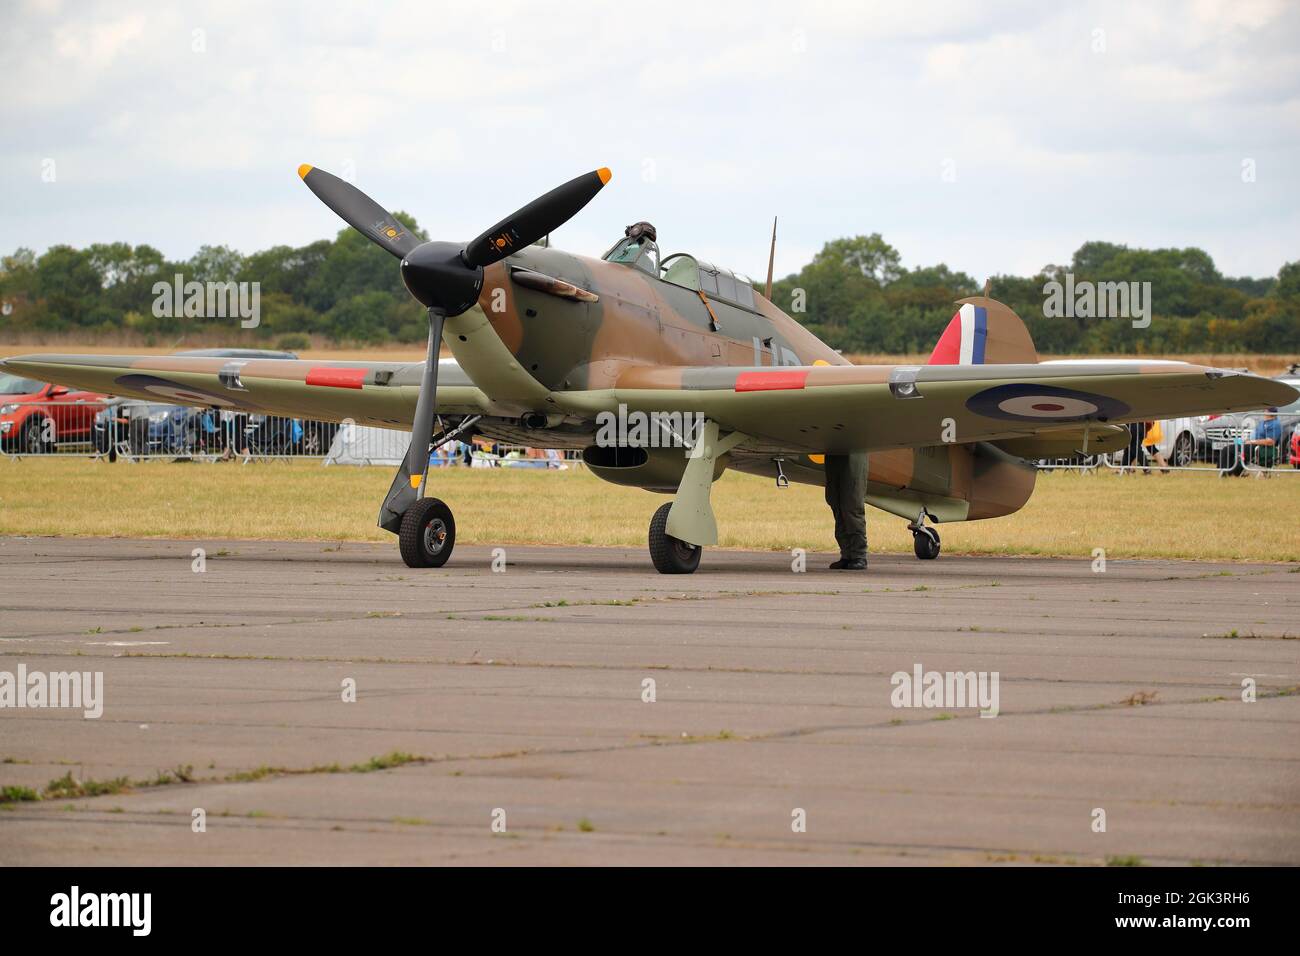 A Hawker Hurricane parked at the Abingdon Air & Country Show 2021 Stock Photo